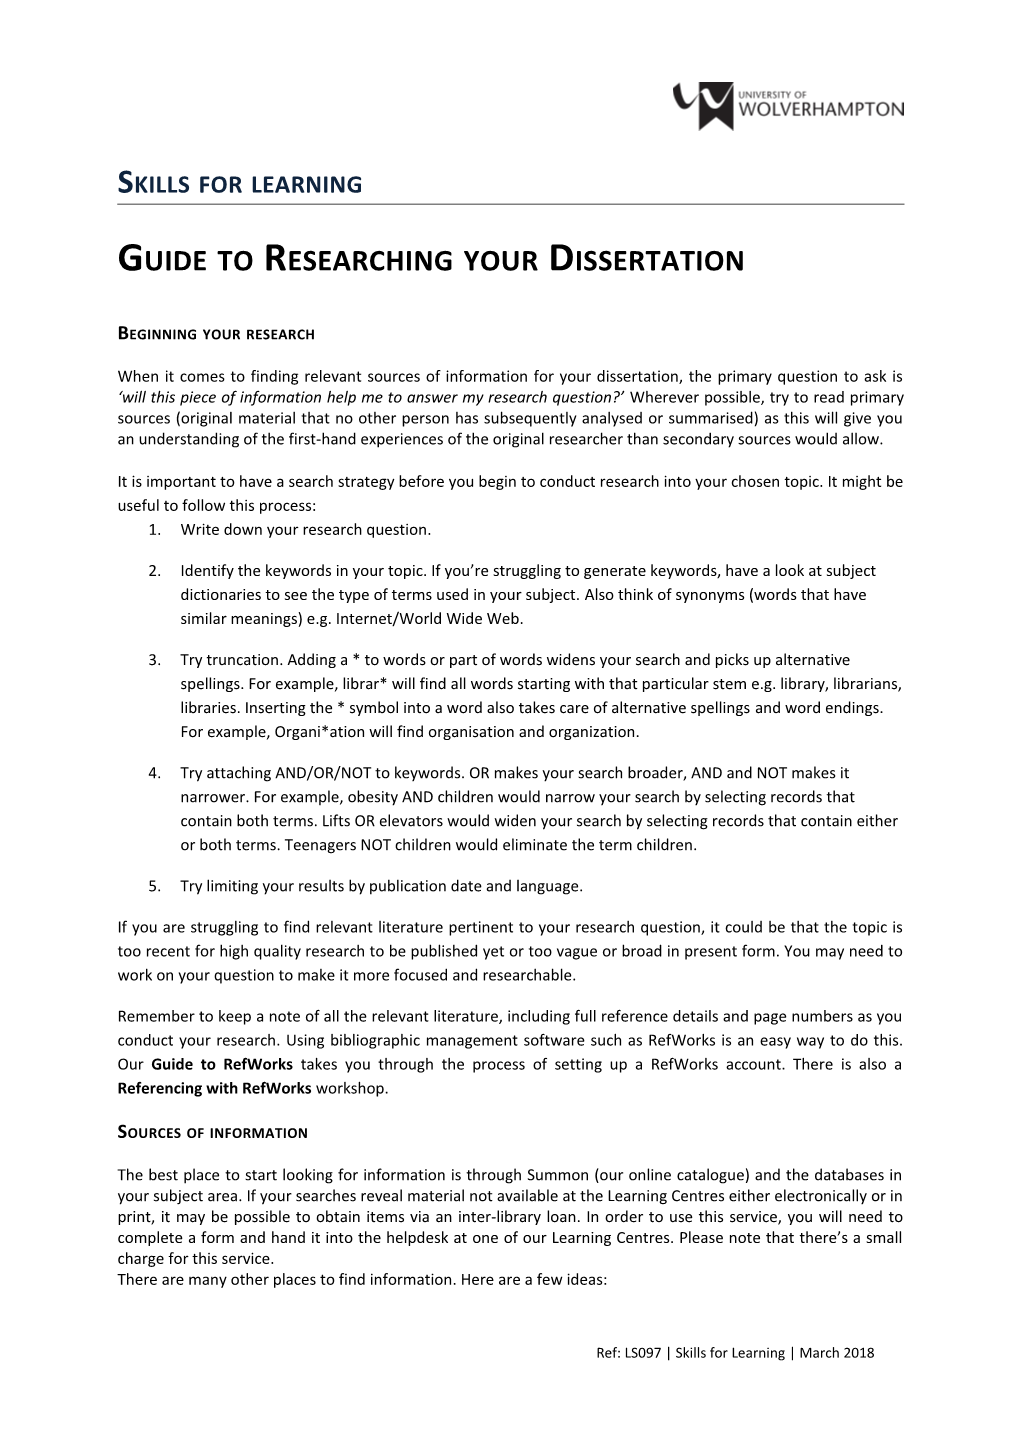 Guide to Researching Your Dissertation